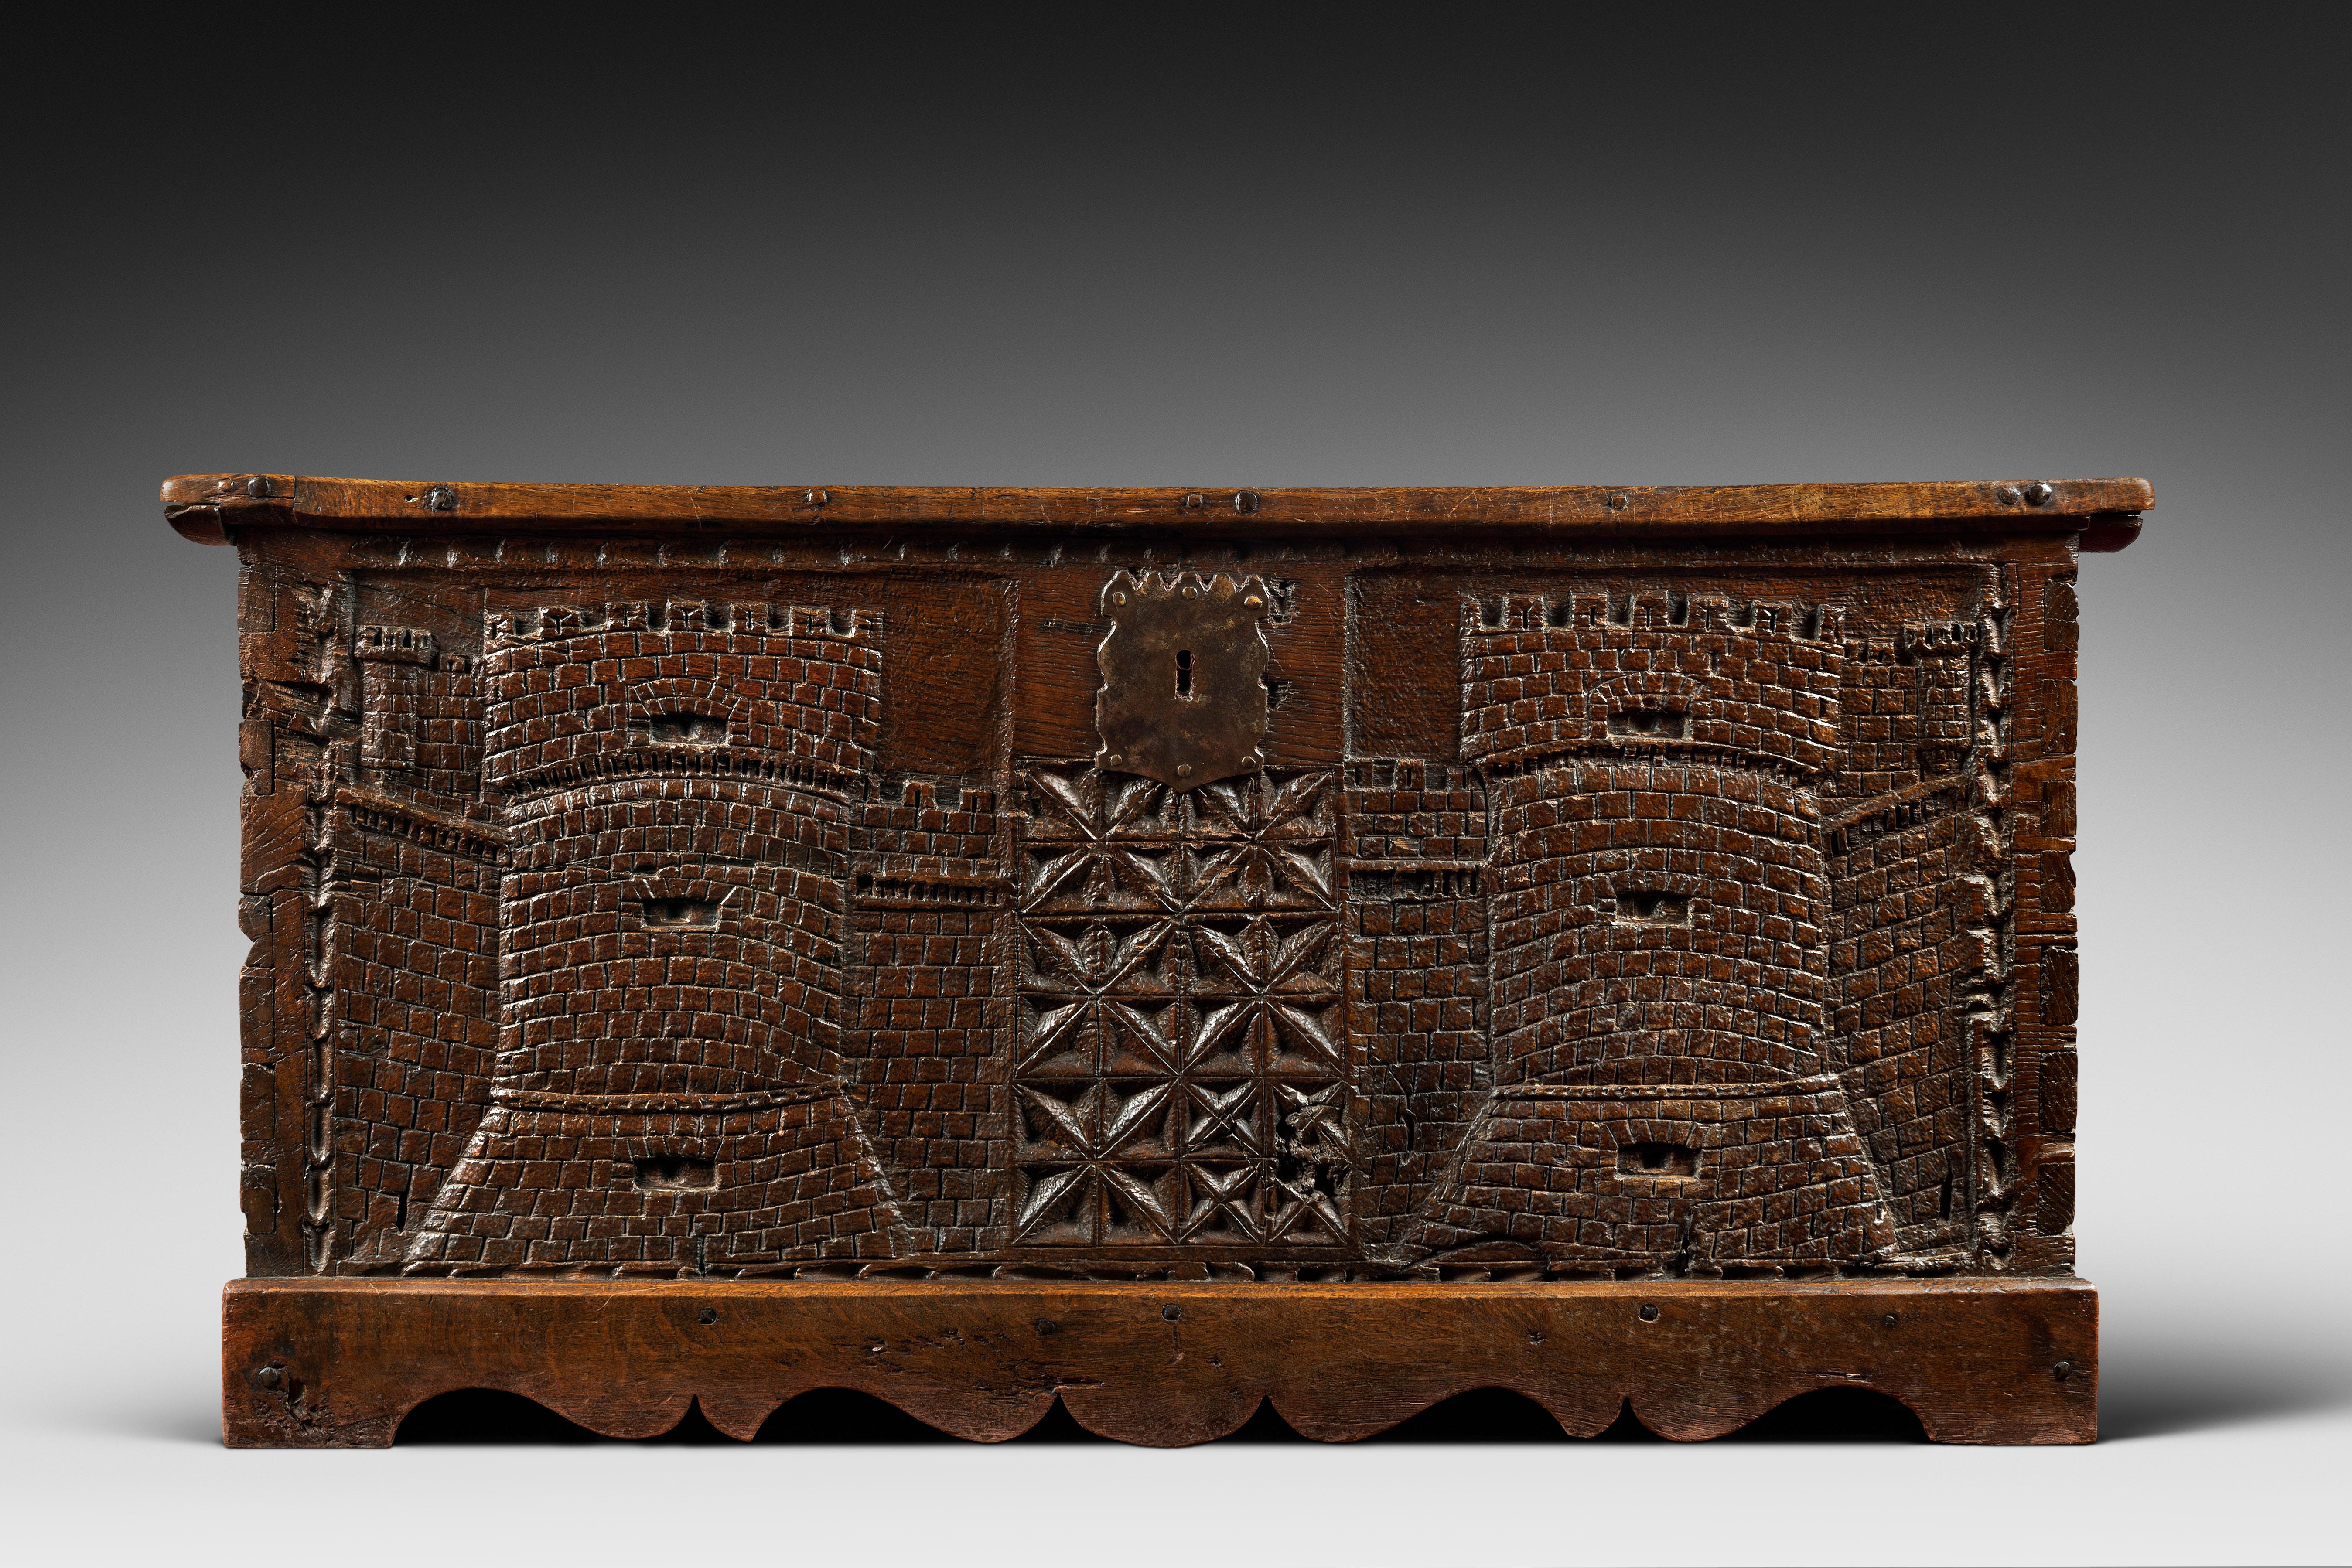 WOODEN CHEST CARVED WITH TWO CRENELLATED TOWERS


ORIGIN: SOUTH WEST OF FRANCE
PERIOD: 16th CENTURY

Height: 64,5 cm
Length: 124 cm
Depth: 53 cm

Chestnut wood 
Good condition


The chest is an essential piece of furniture of the